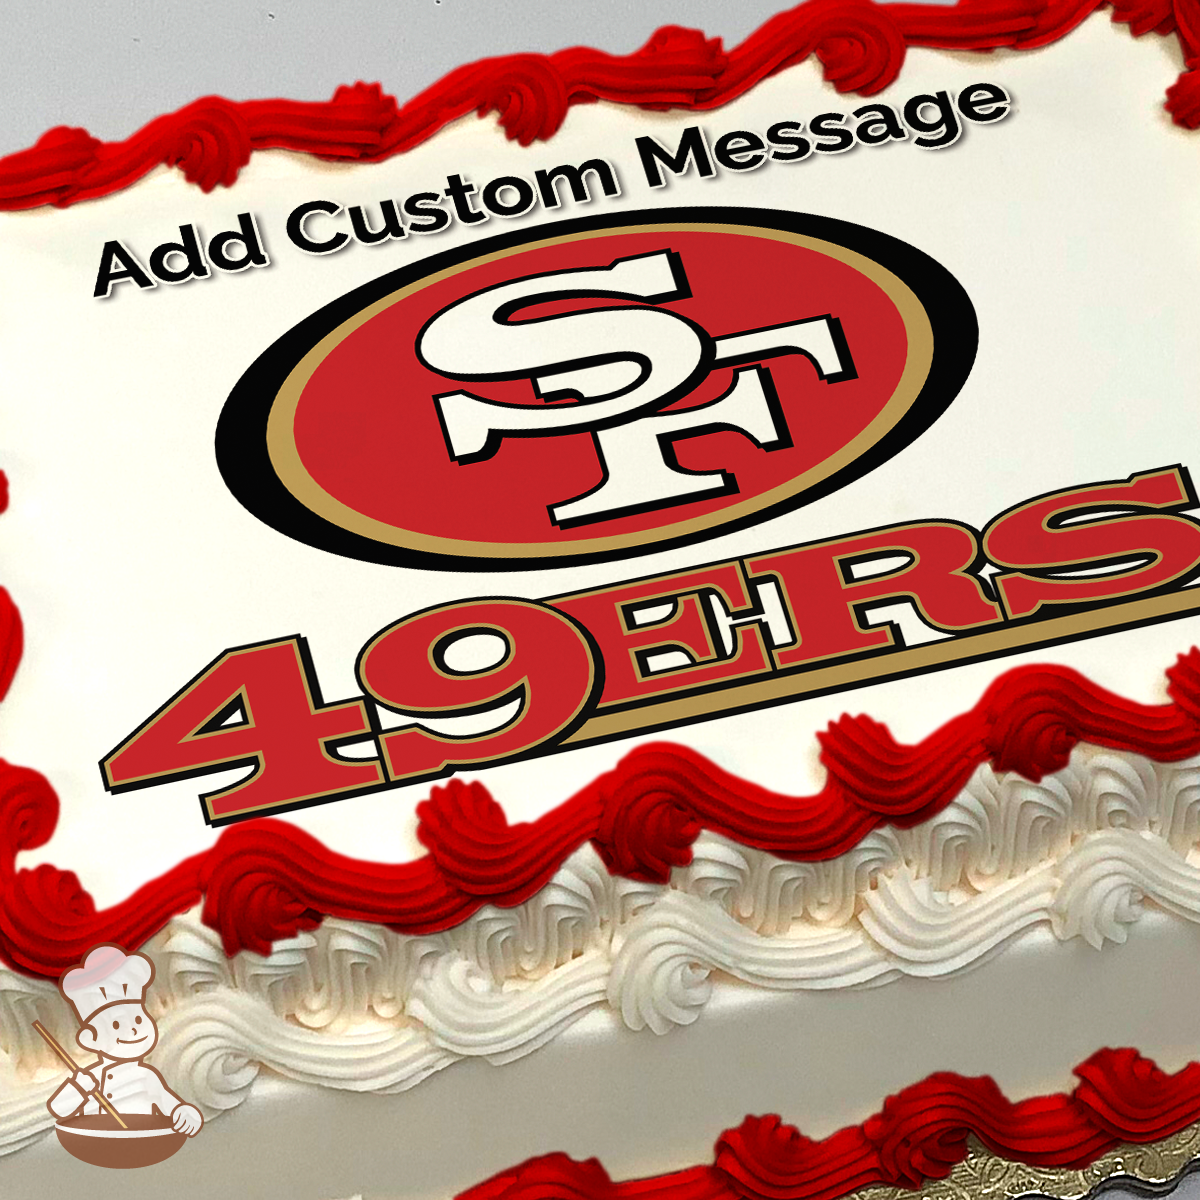 Sf 49ers cake topper #happybirthday#sanfrancisco49ers